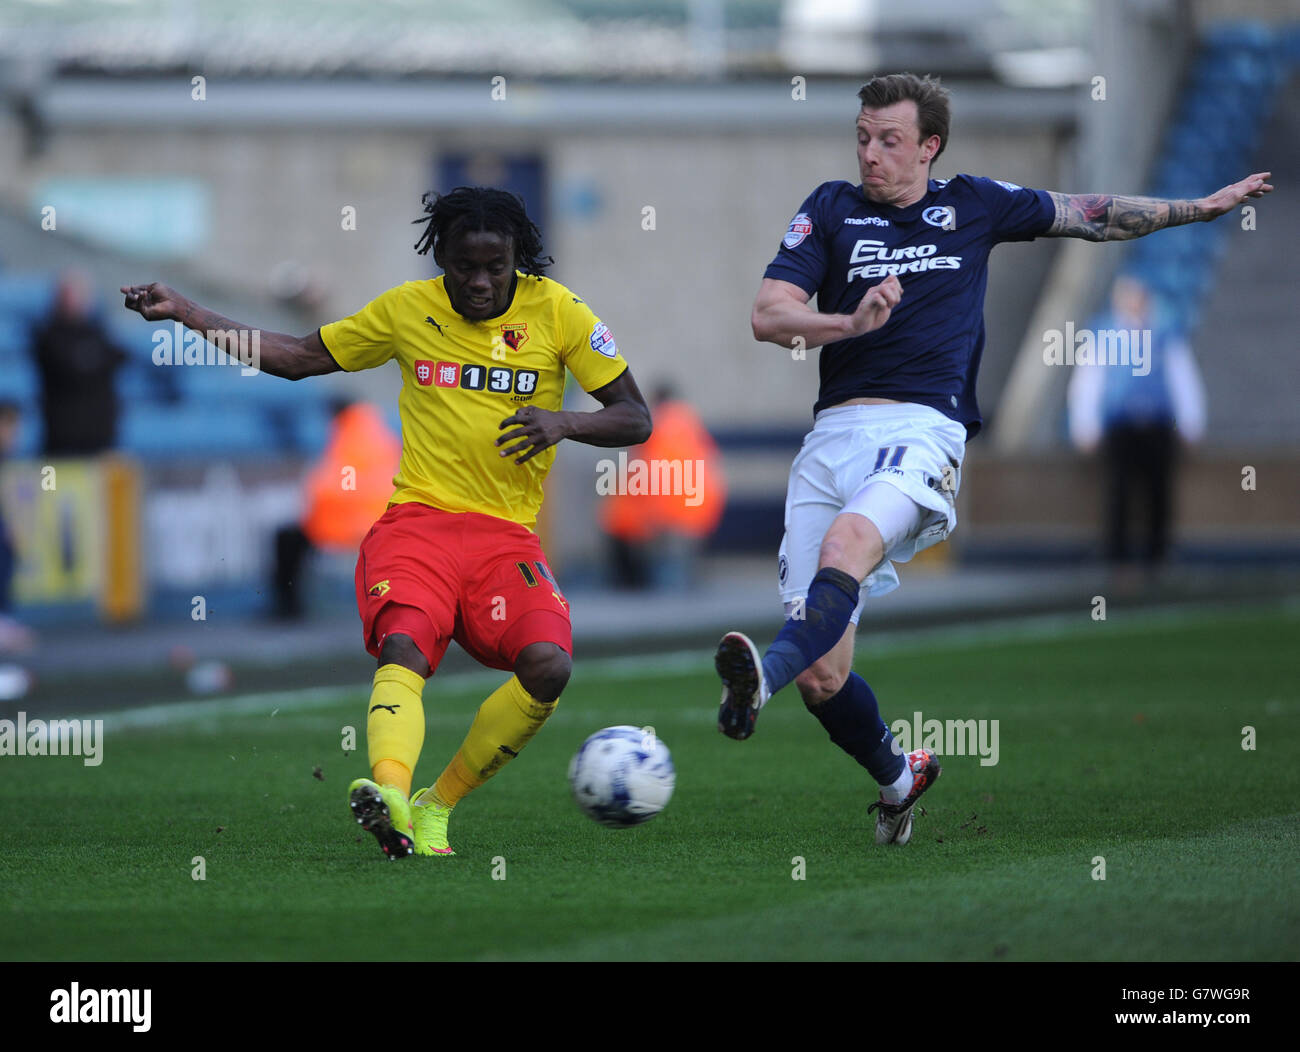 Watford's Juan Carlos Paredes (eft) and Millwall's Martyn Woolford during the Sky Bet Championship match at The New Den, London. Stock Photo